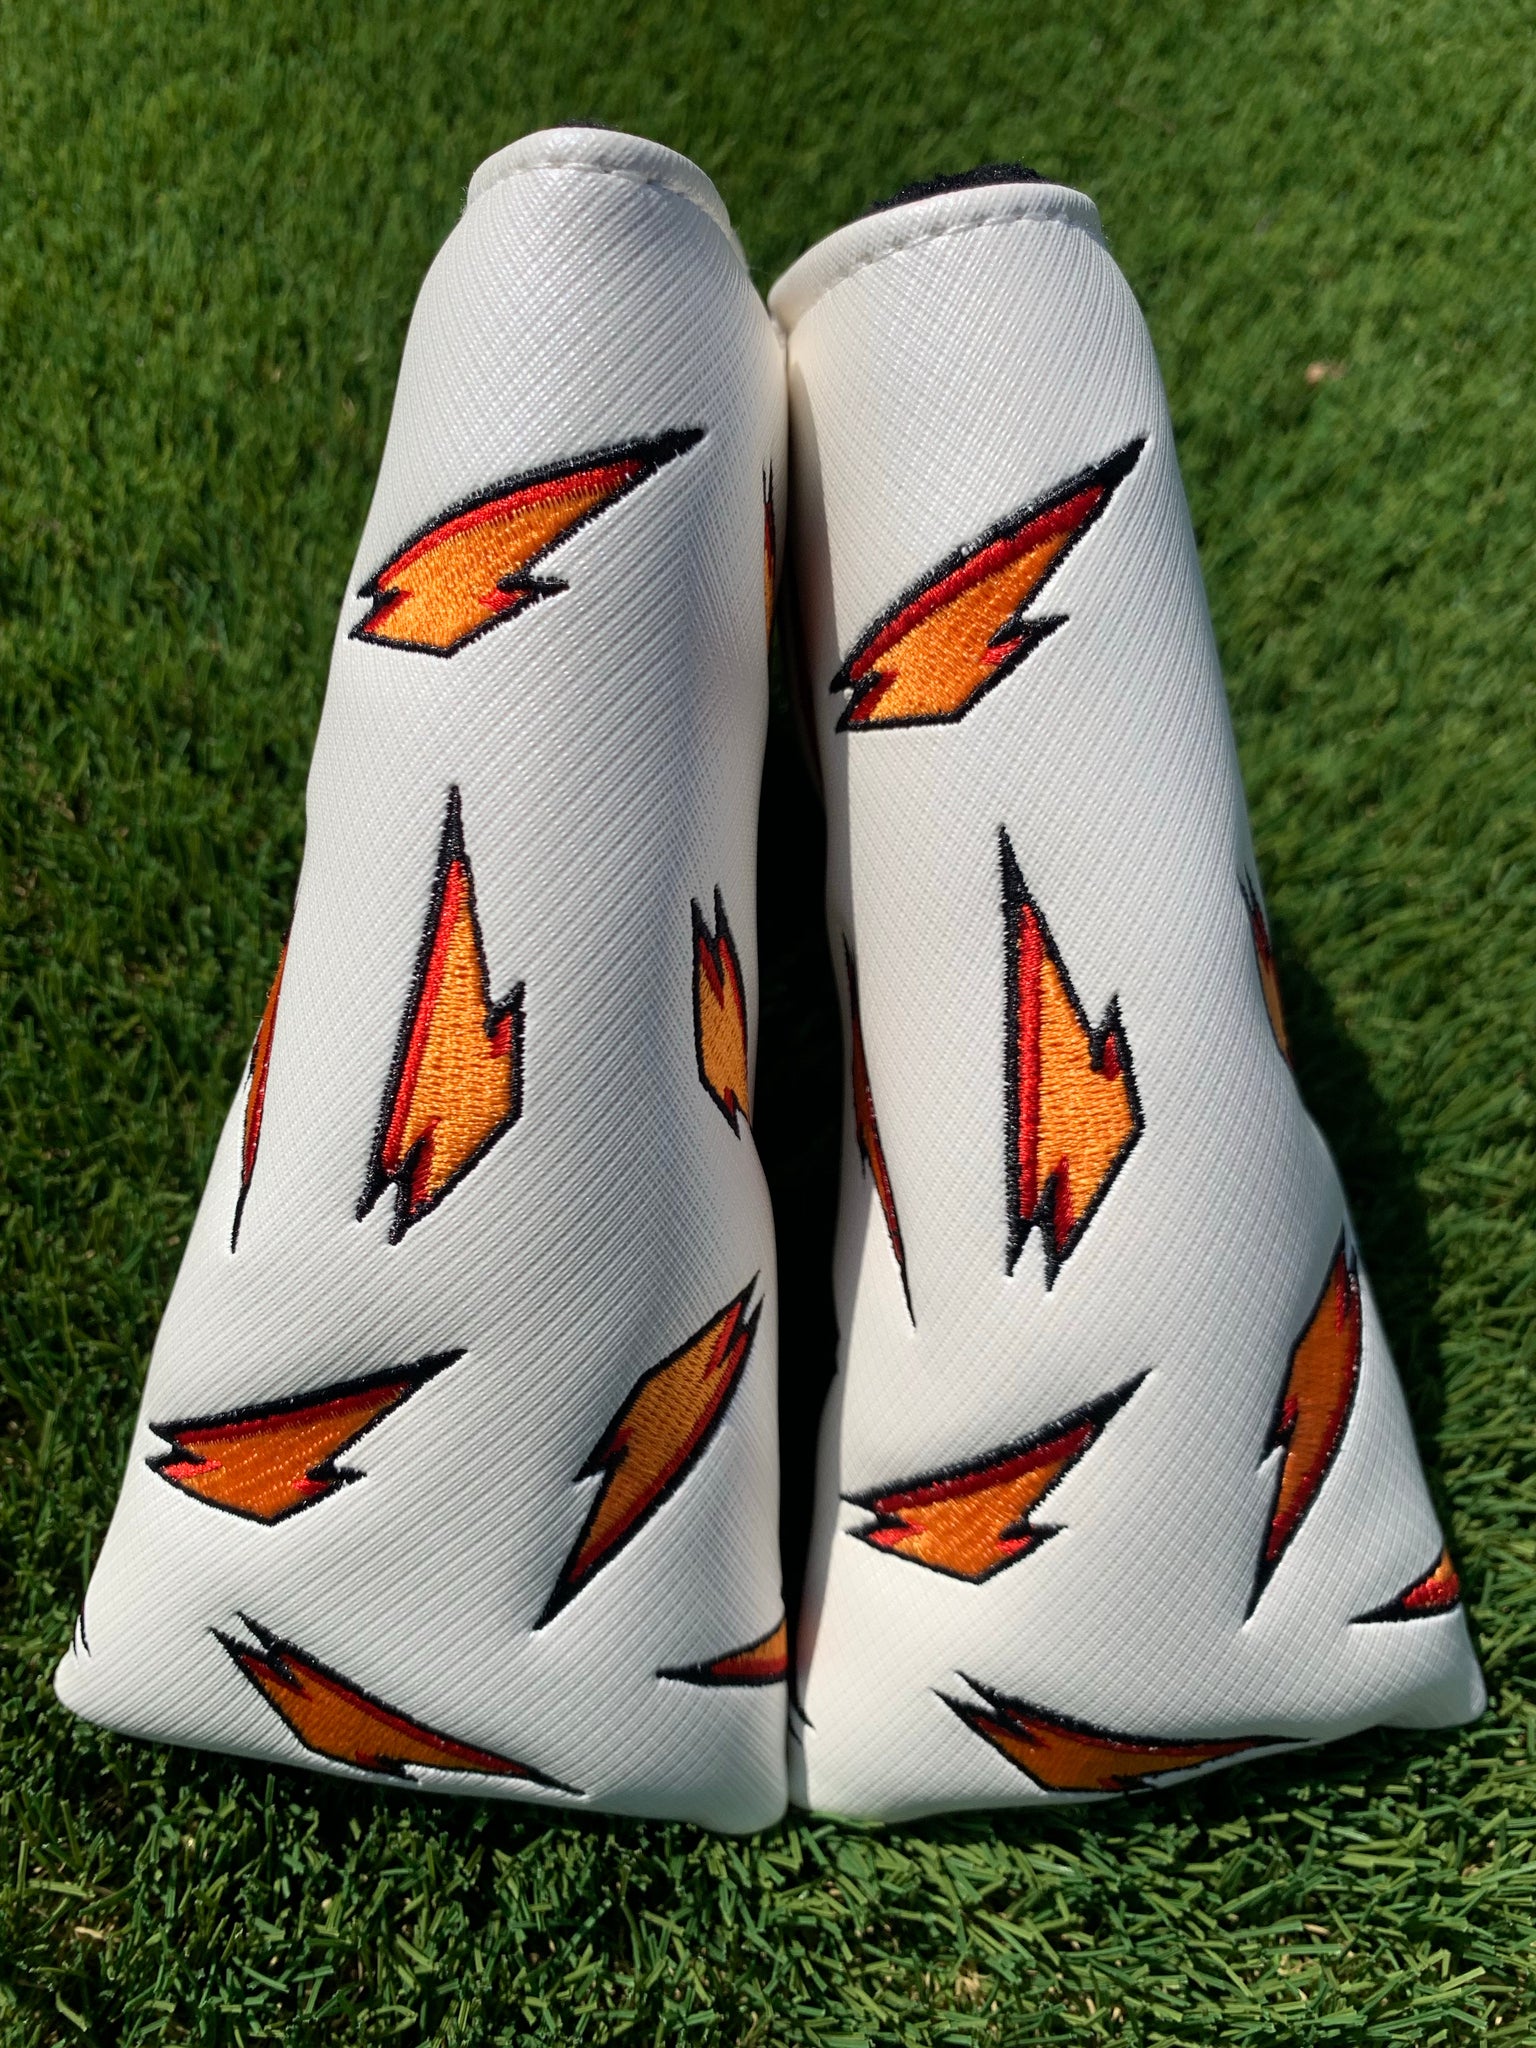 Grindade Blade Putter Cover - Magnetic - White “Ice”